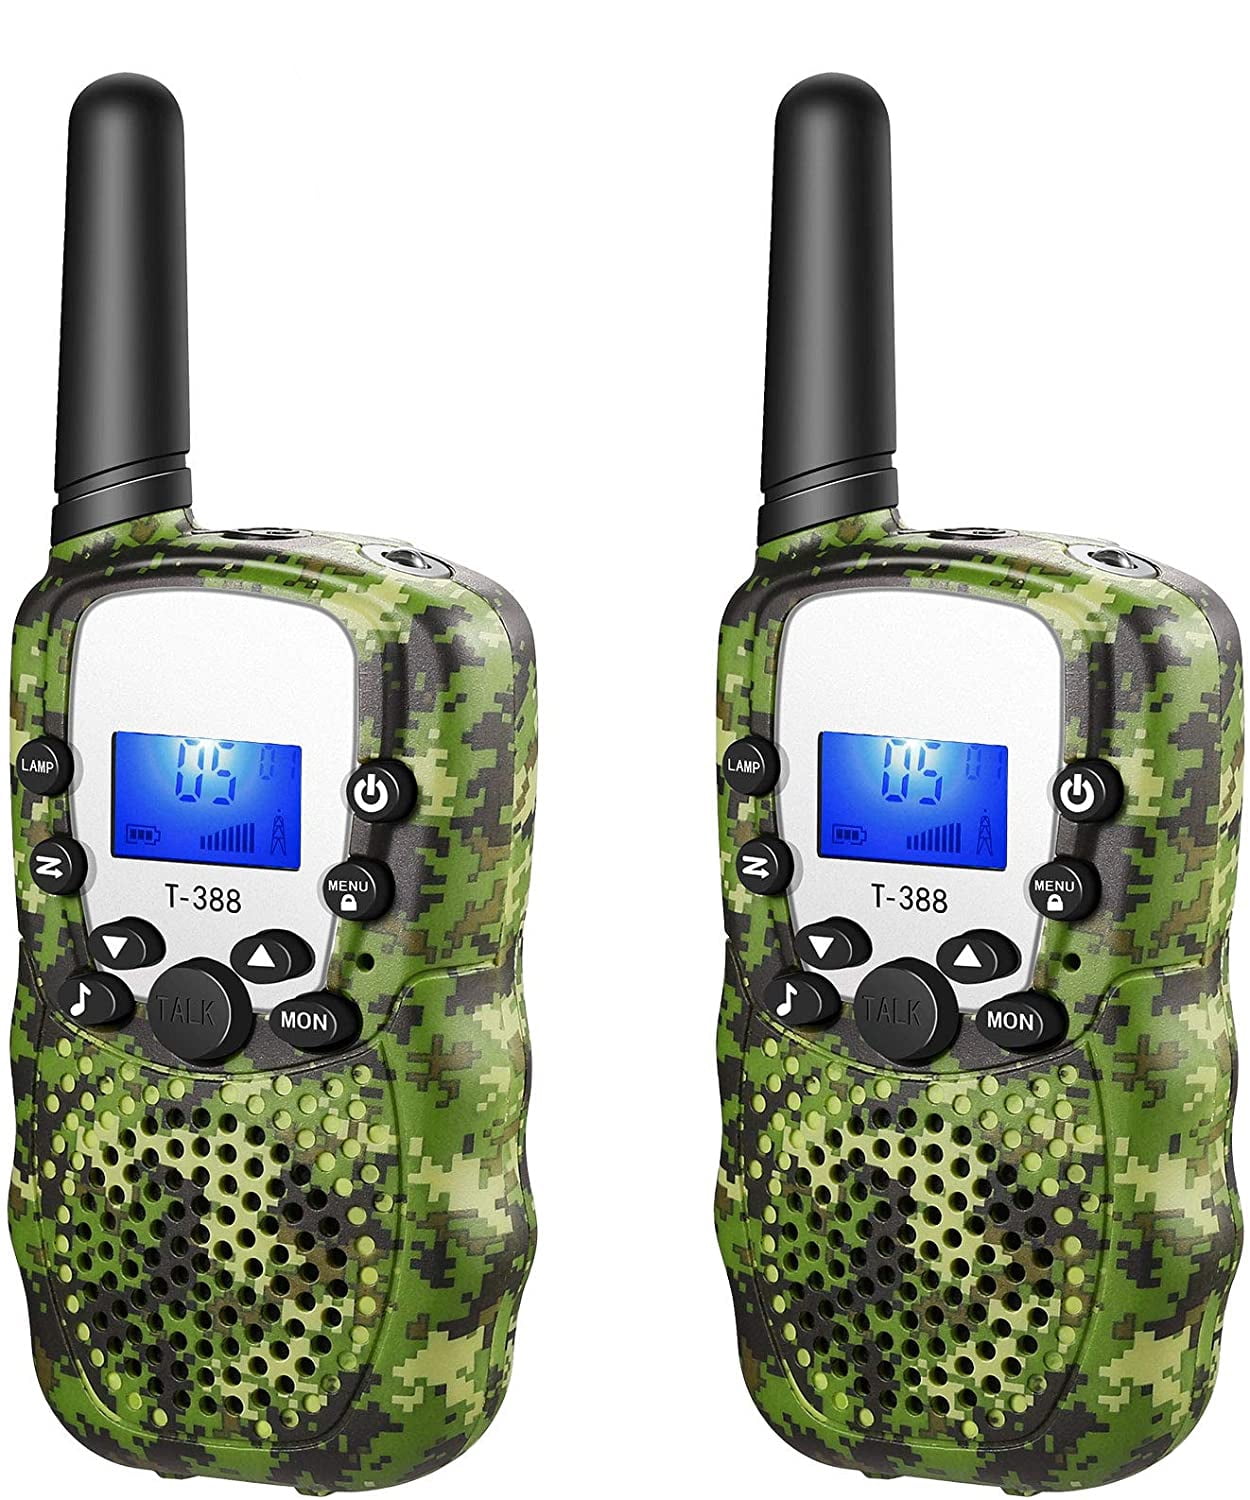 Portable FRS Children Long Range 2 Way Radios Gifts for 3-12 Year Old Girls Boys GOCOM Walkie Talkies Kids Toys 2 Pack Walky Talky for Outdoor Indoor Play Camping Birthday Party Camouflage Pink 